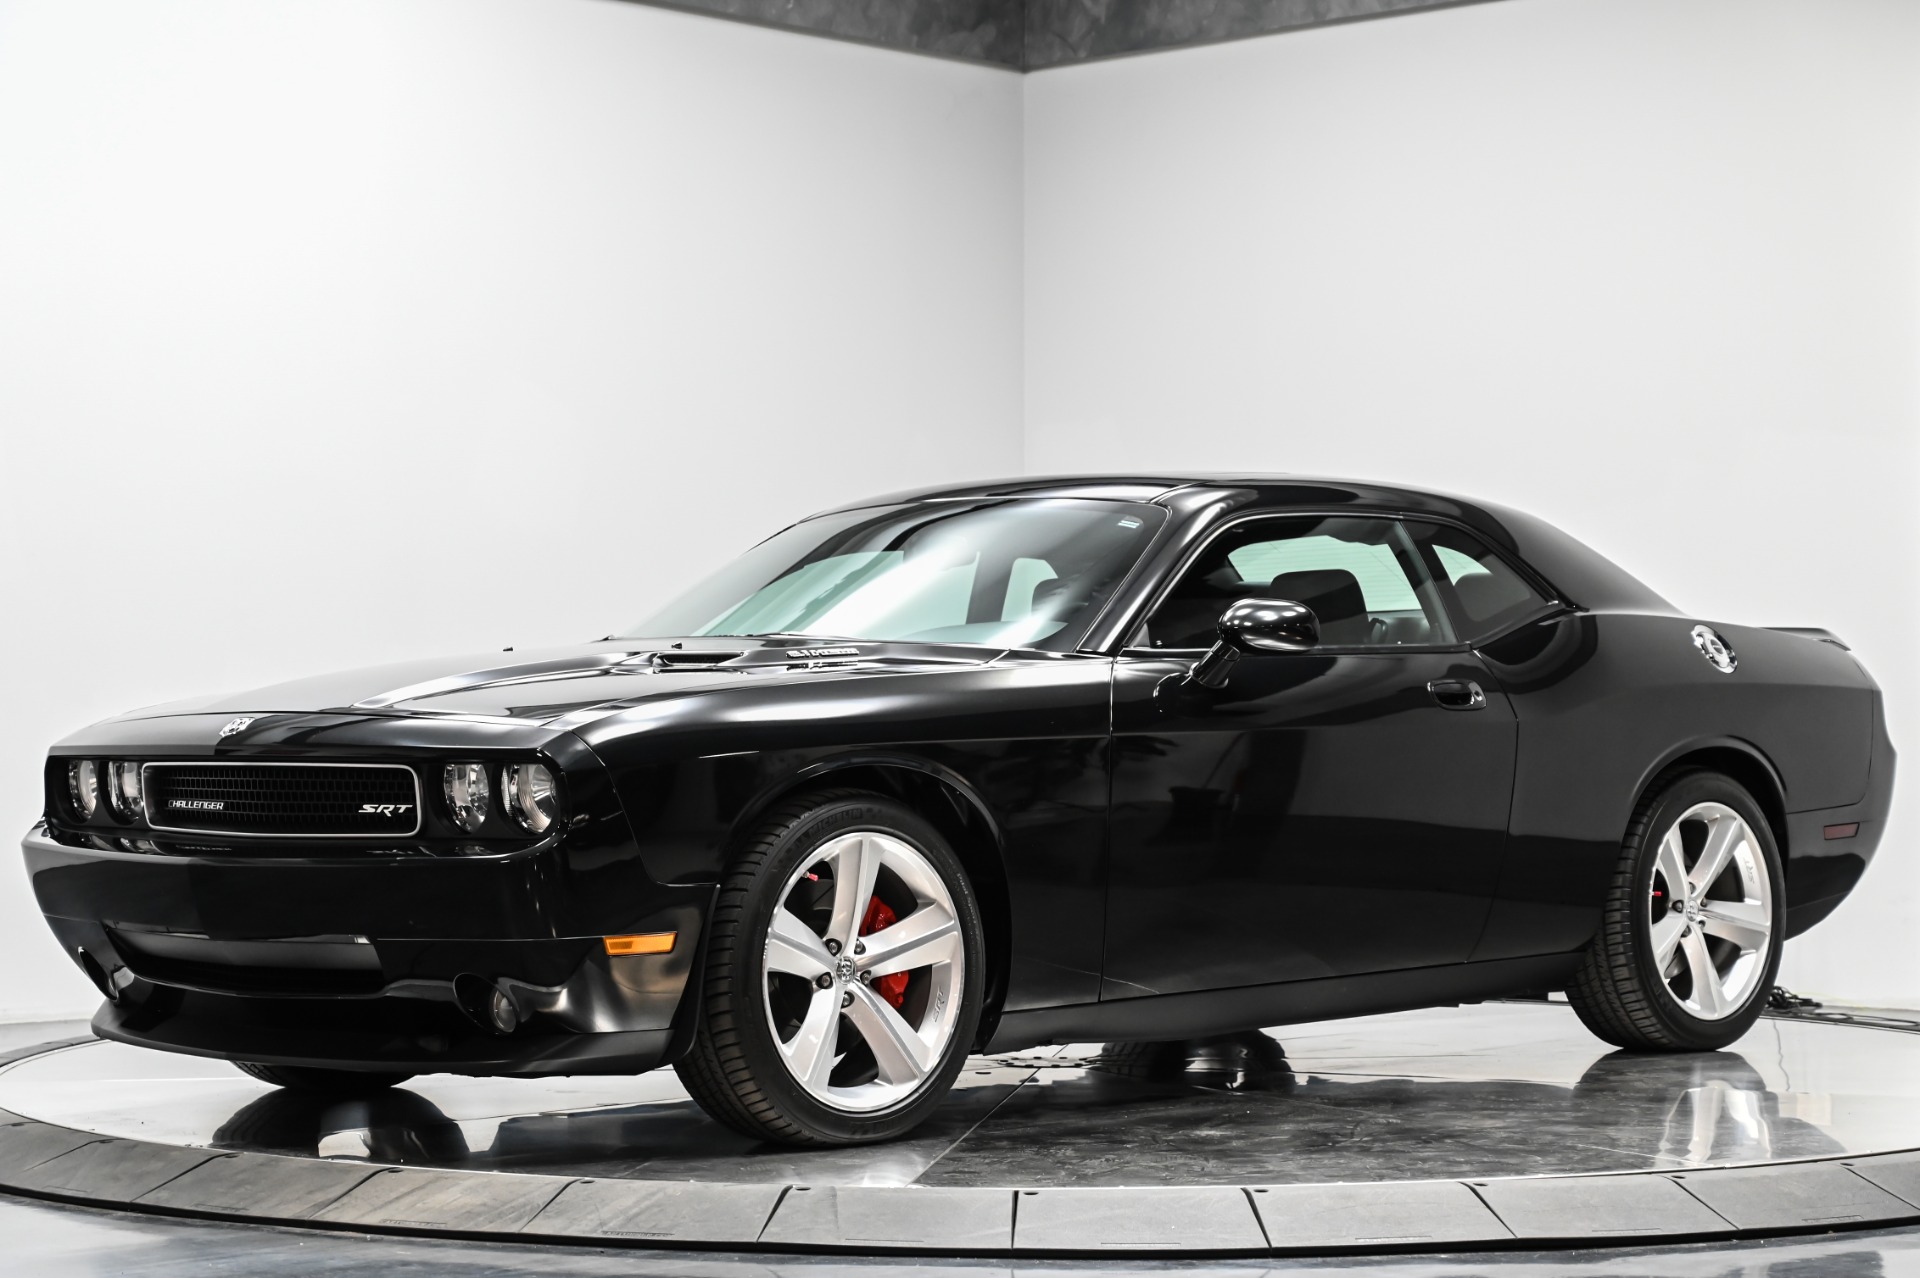 Used 2009 Dodge Challenger SRT8 For Sale (Sold) Perfect Auto Collection  Stock #9H541767